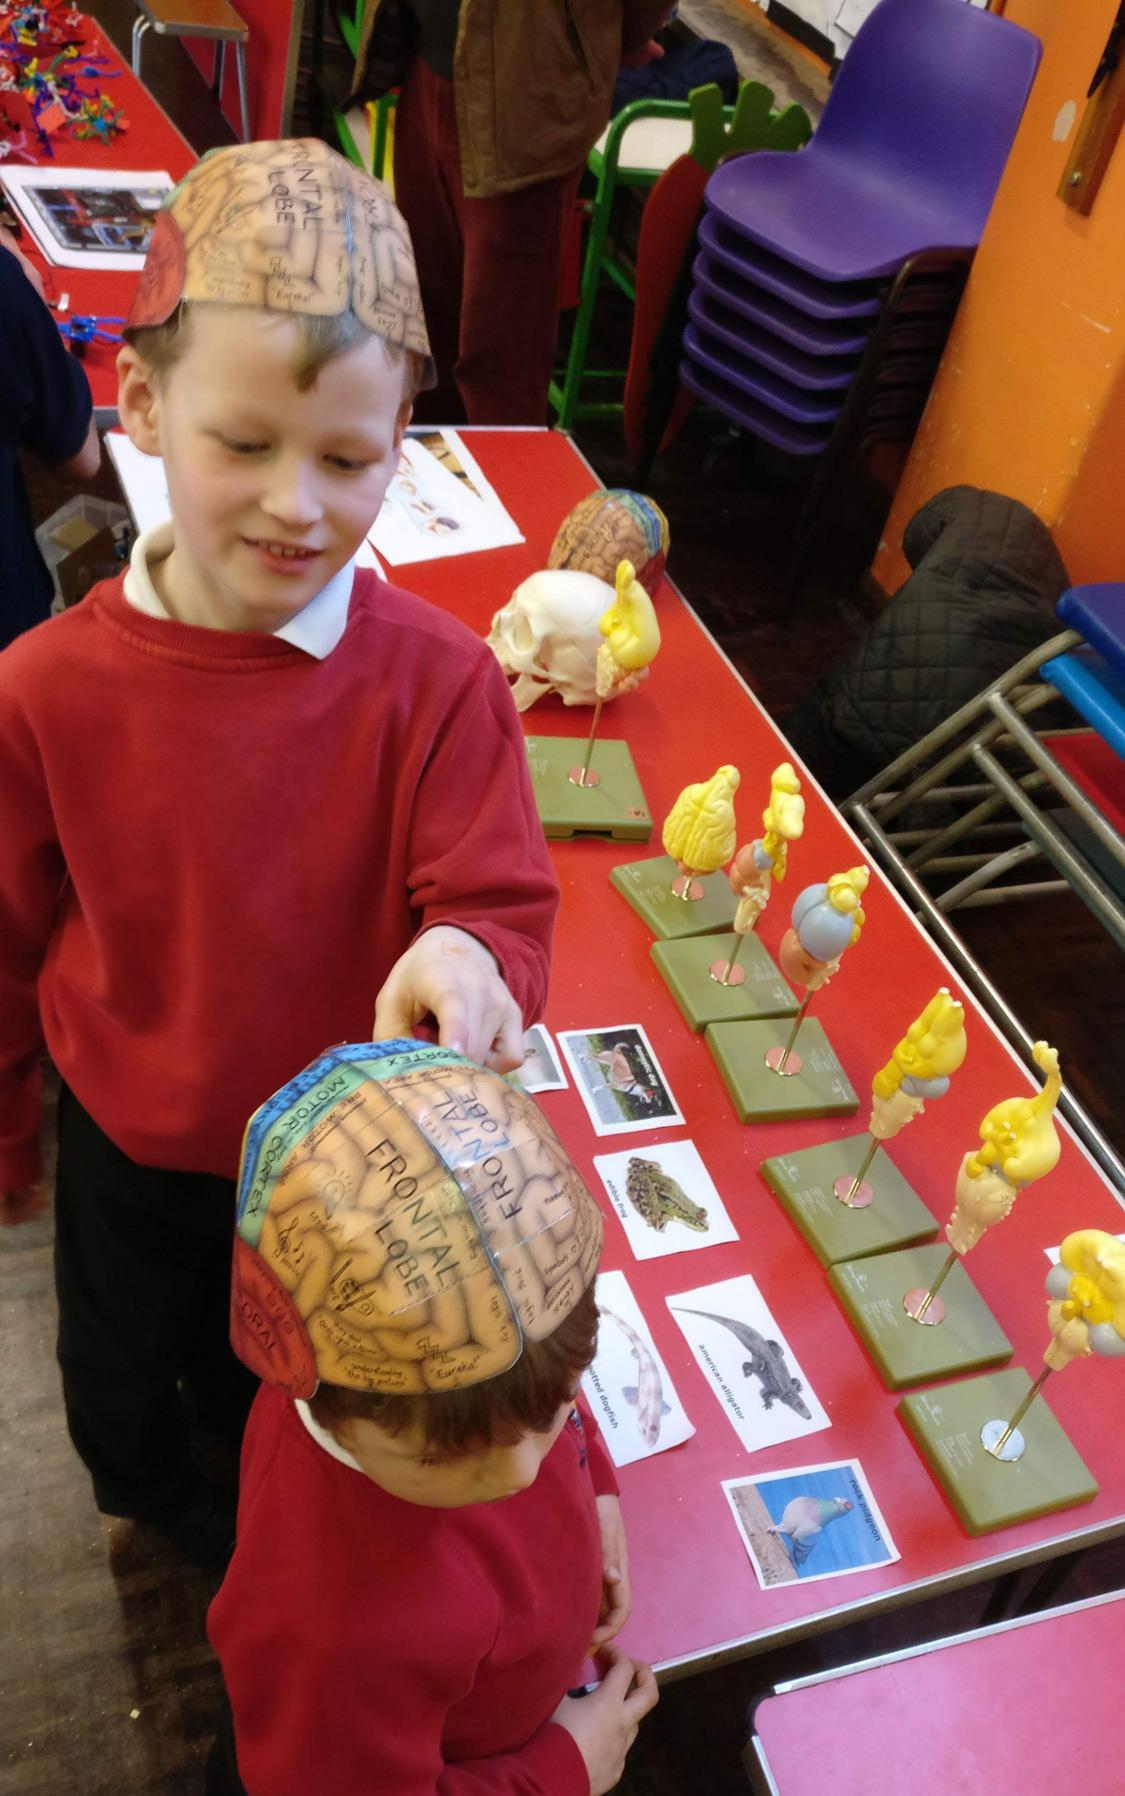 Pupils using 'brain hats' to discover roles of brain areas.